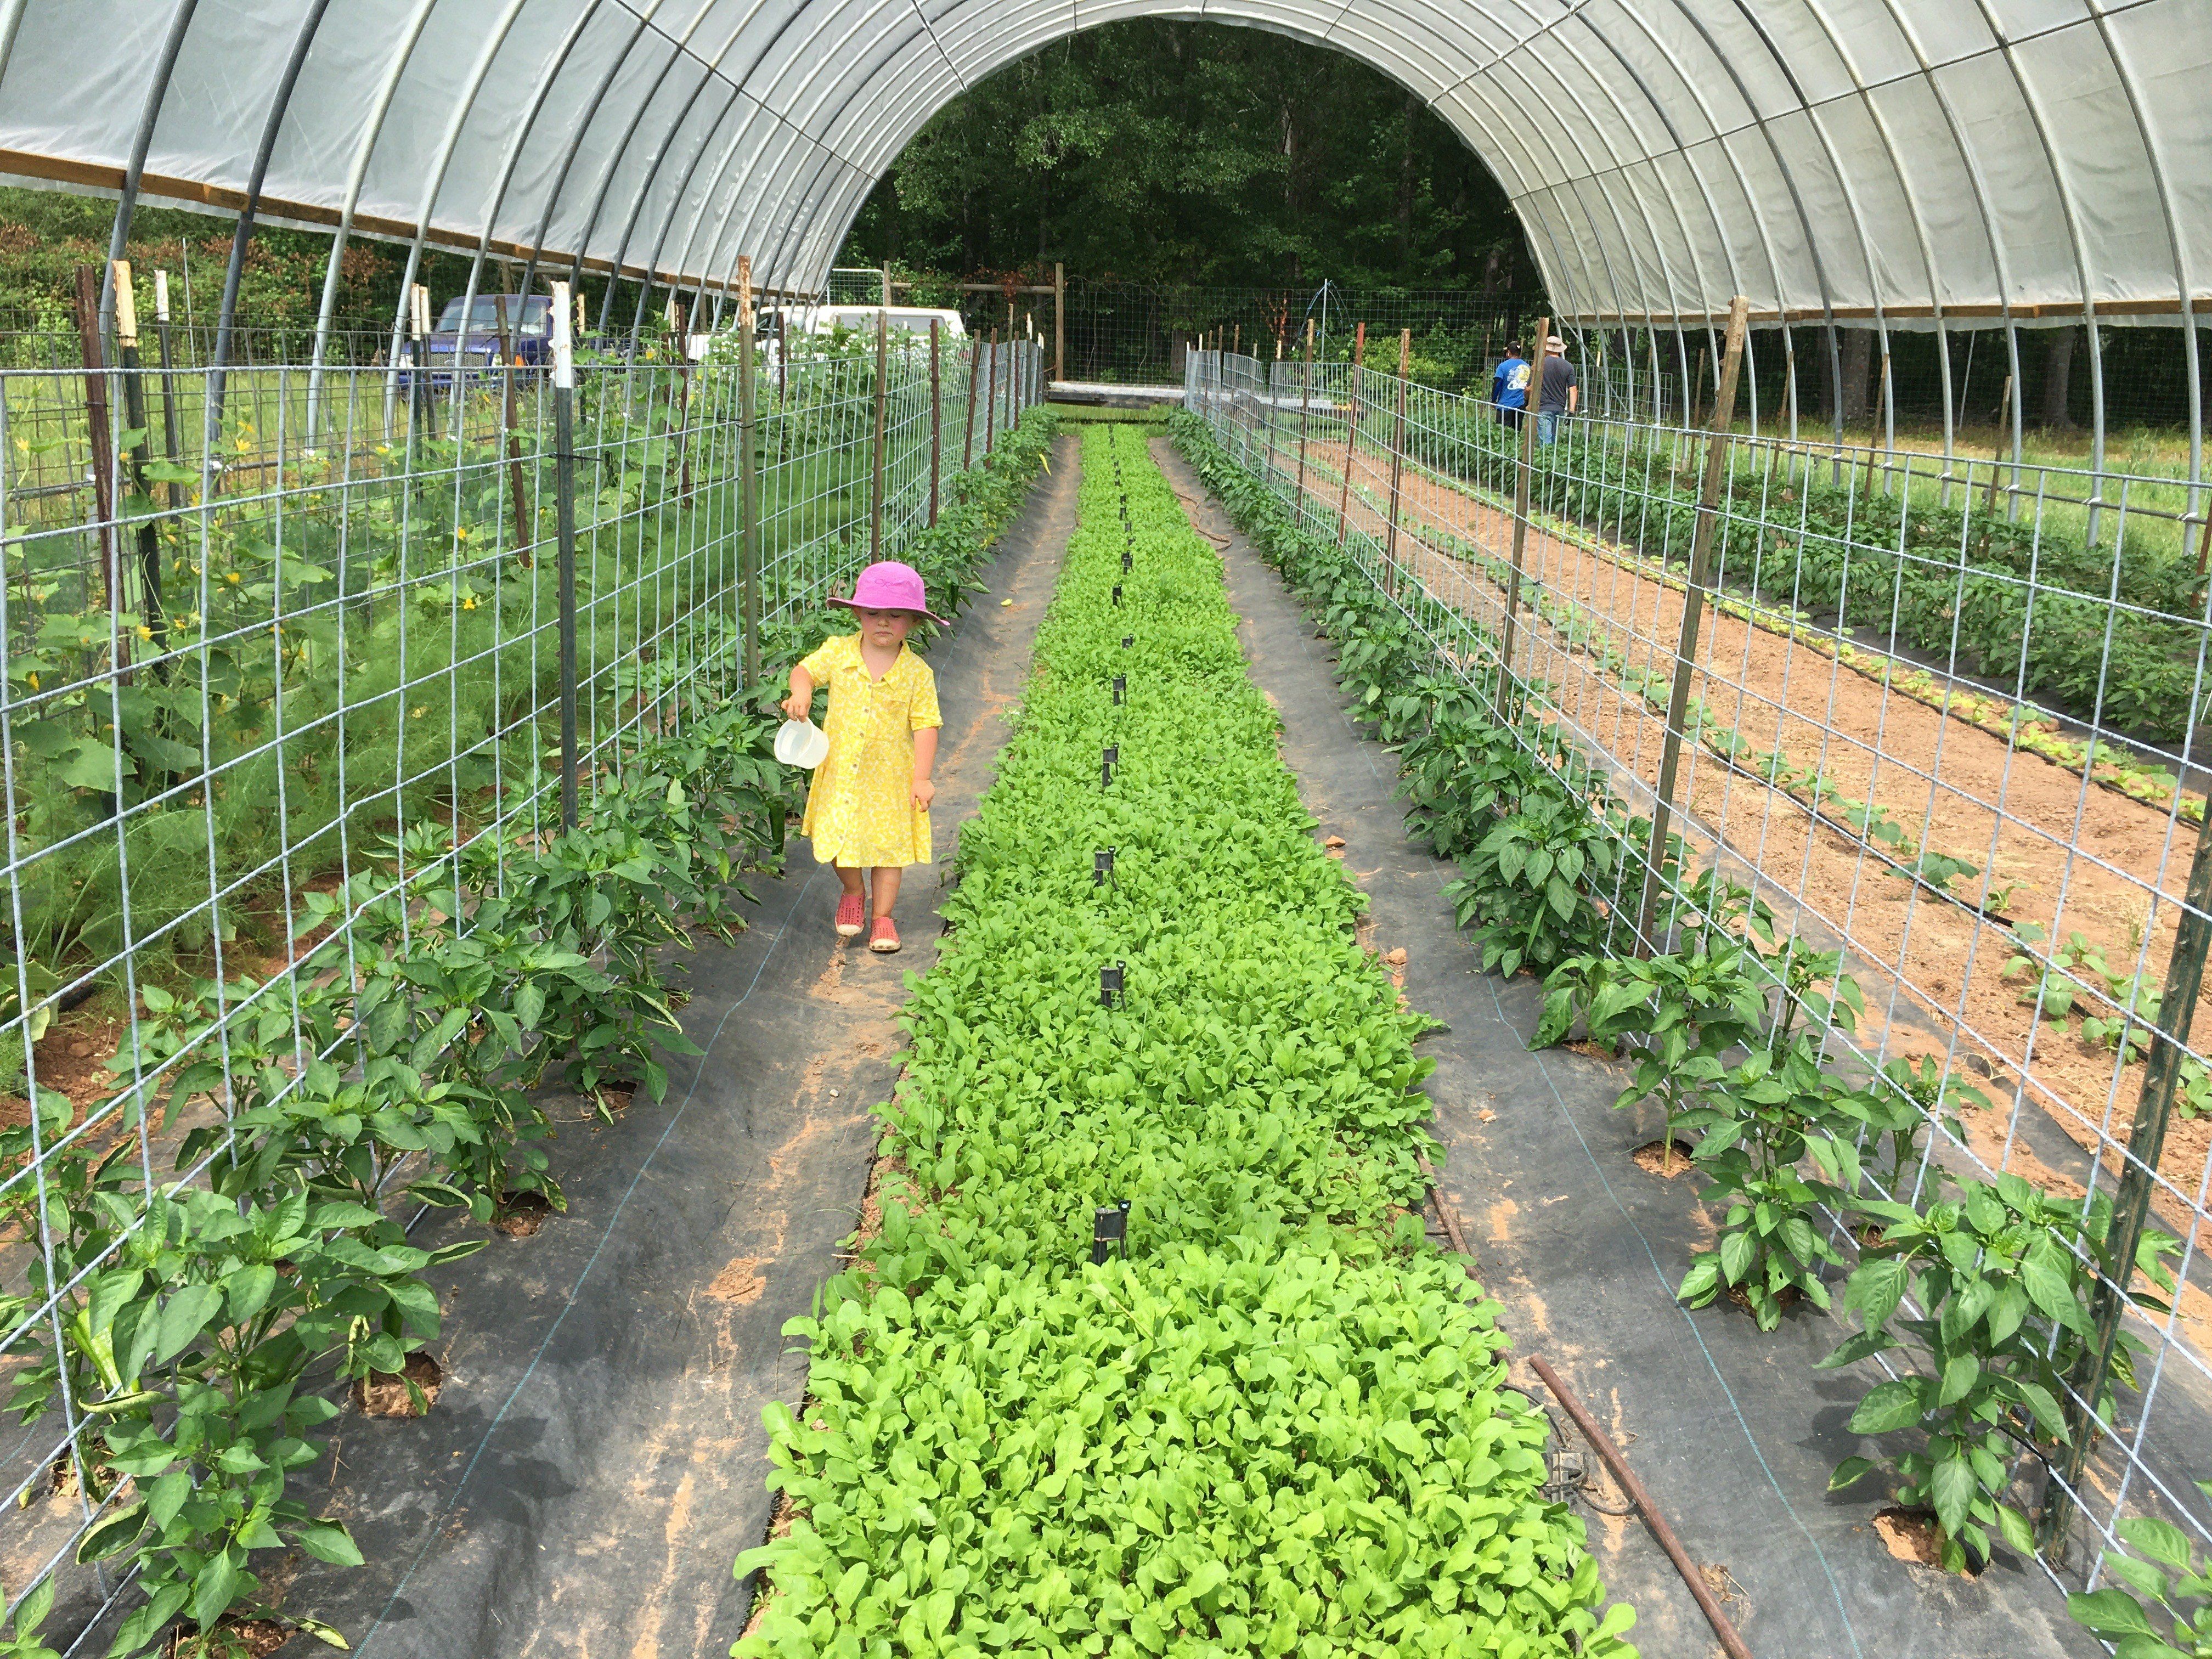 Previous Happening: Farm Happenings for May 29th